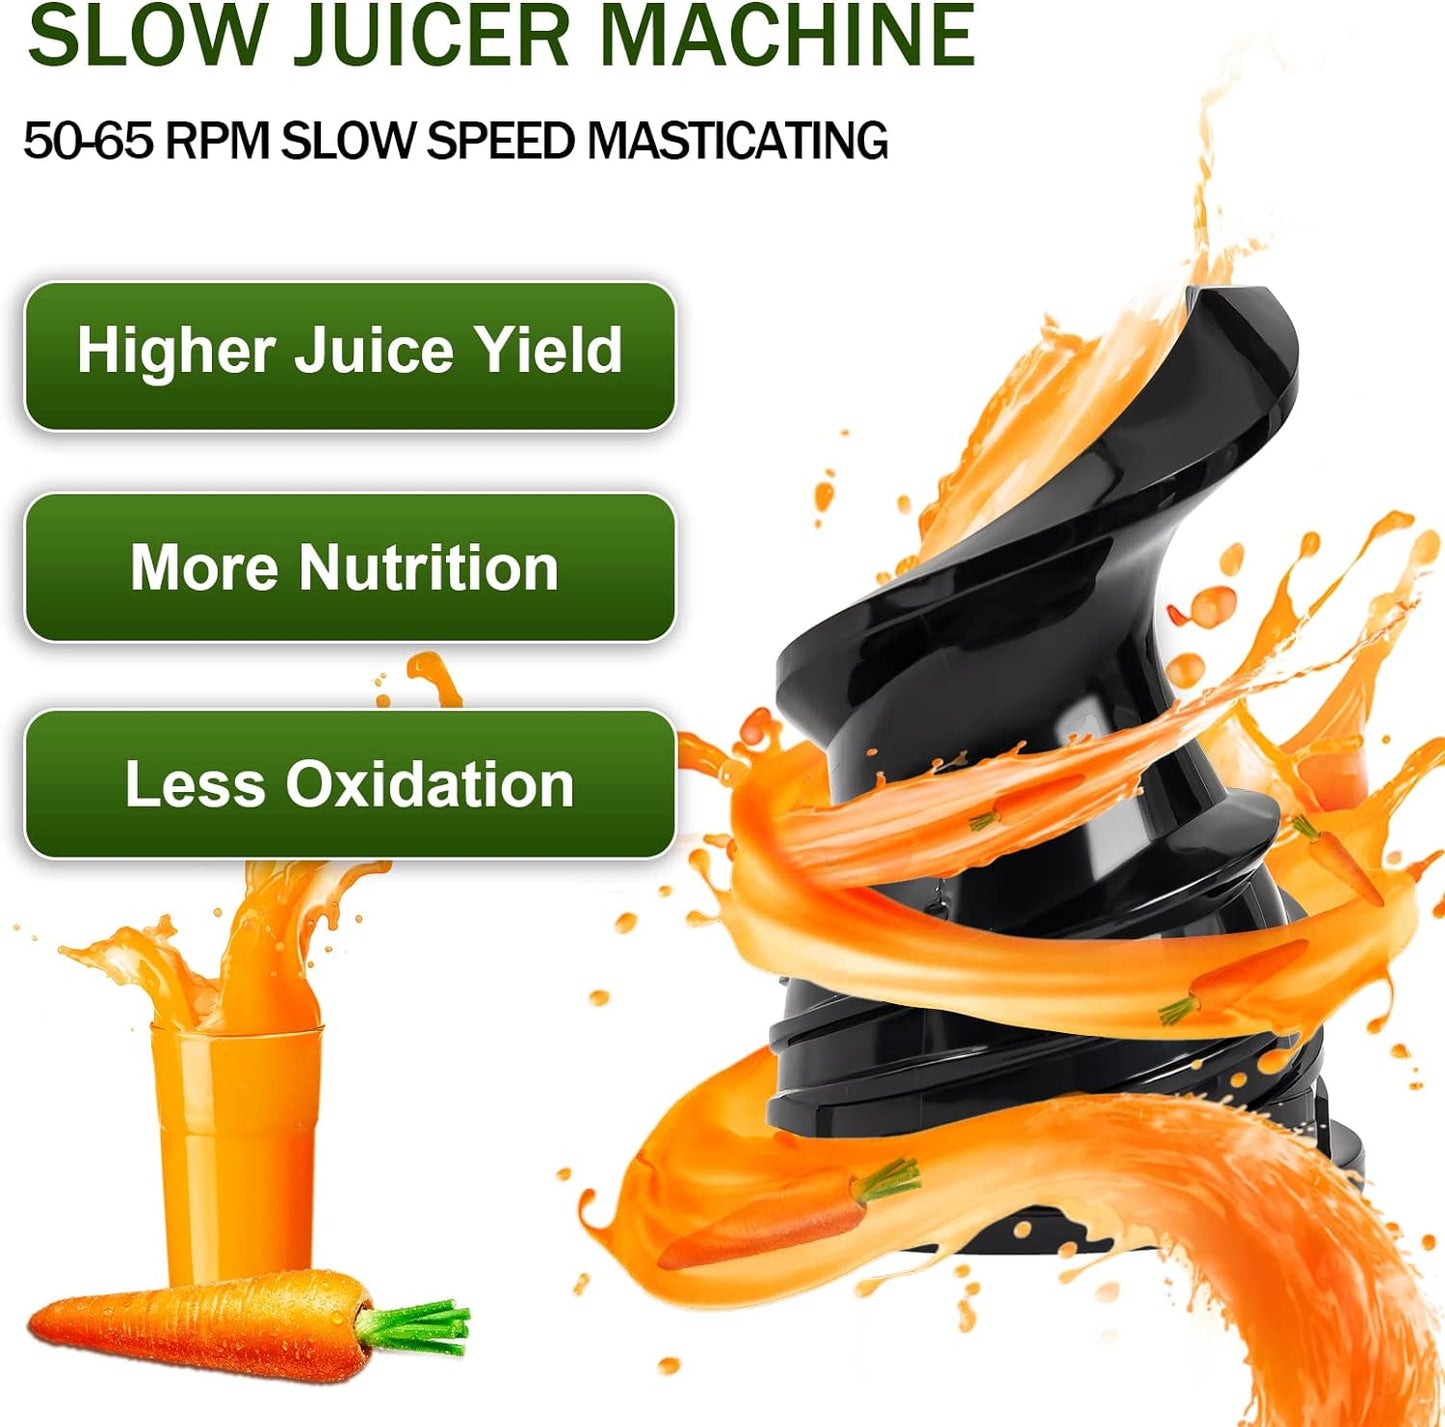 Masticating Juicer Machine for Whole Fruits and Vegetables, Cold Press Slow Juicer with Wide Mouth 80mm Feeding Chute, Reverse Function Quiet Motor Fresh